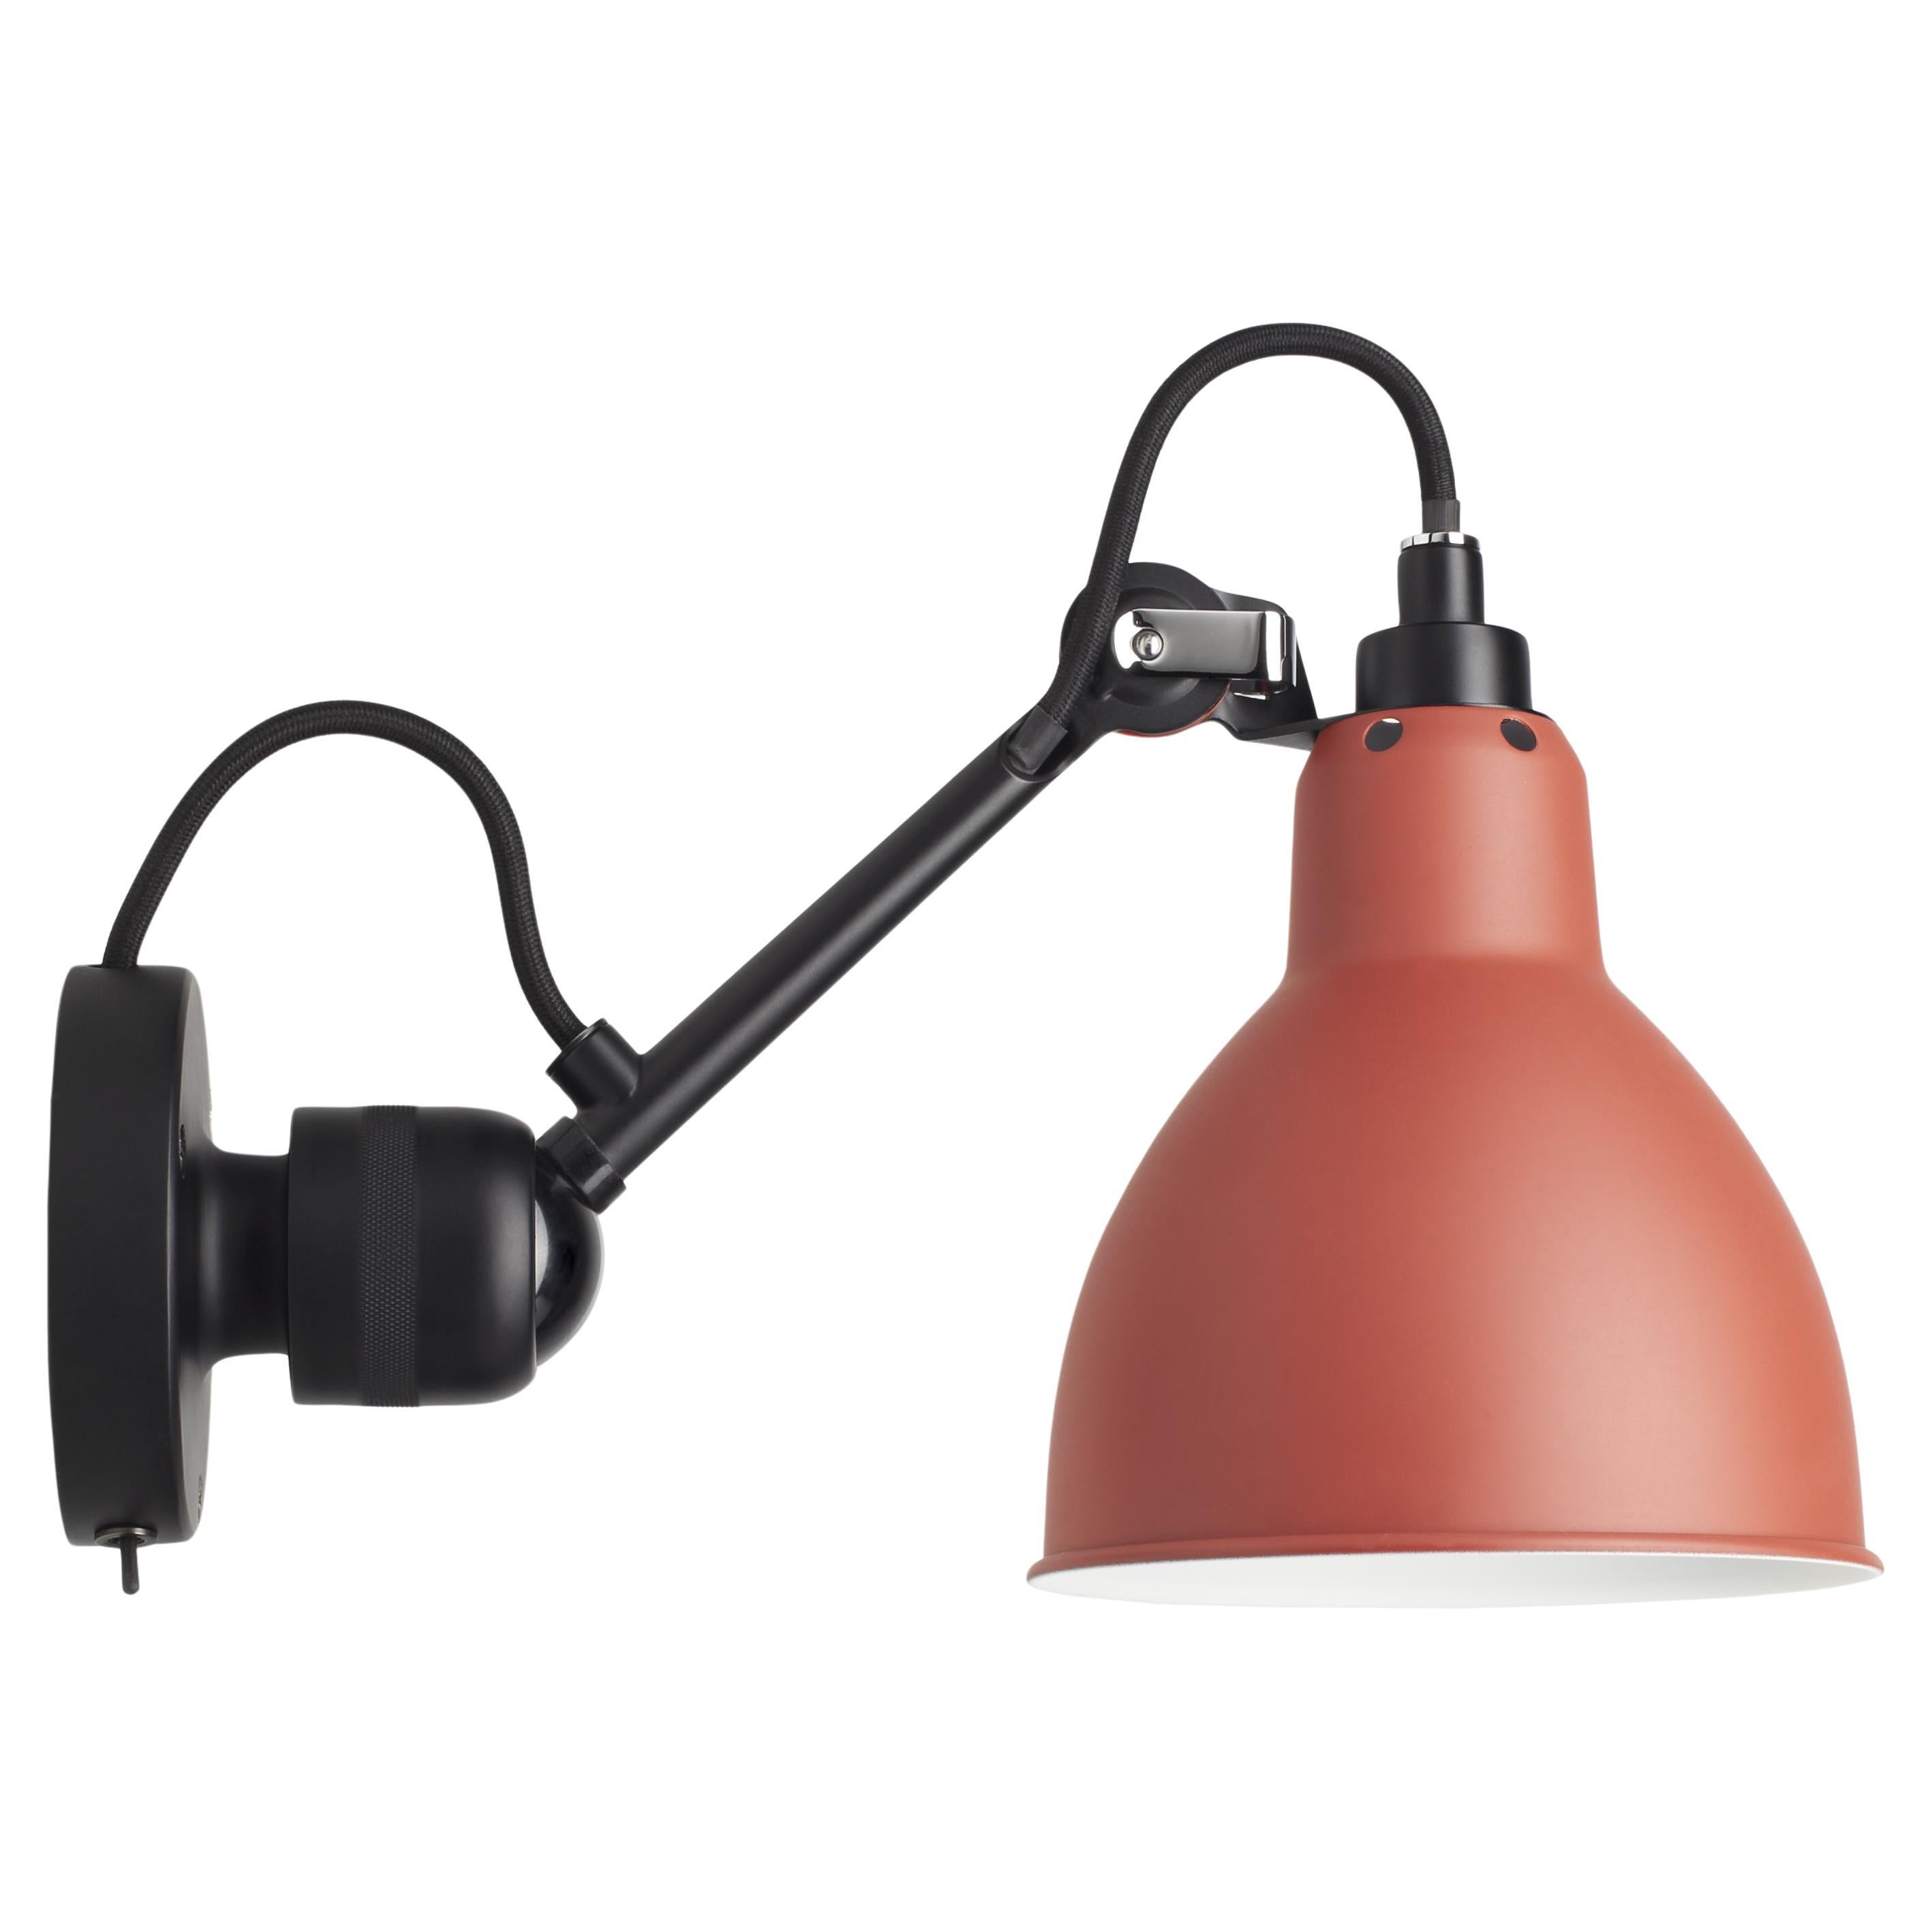 DCW Editions La Lampe Gras N°304 SW Wall Lamp in Black Arm and Red Shade For Sale